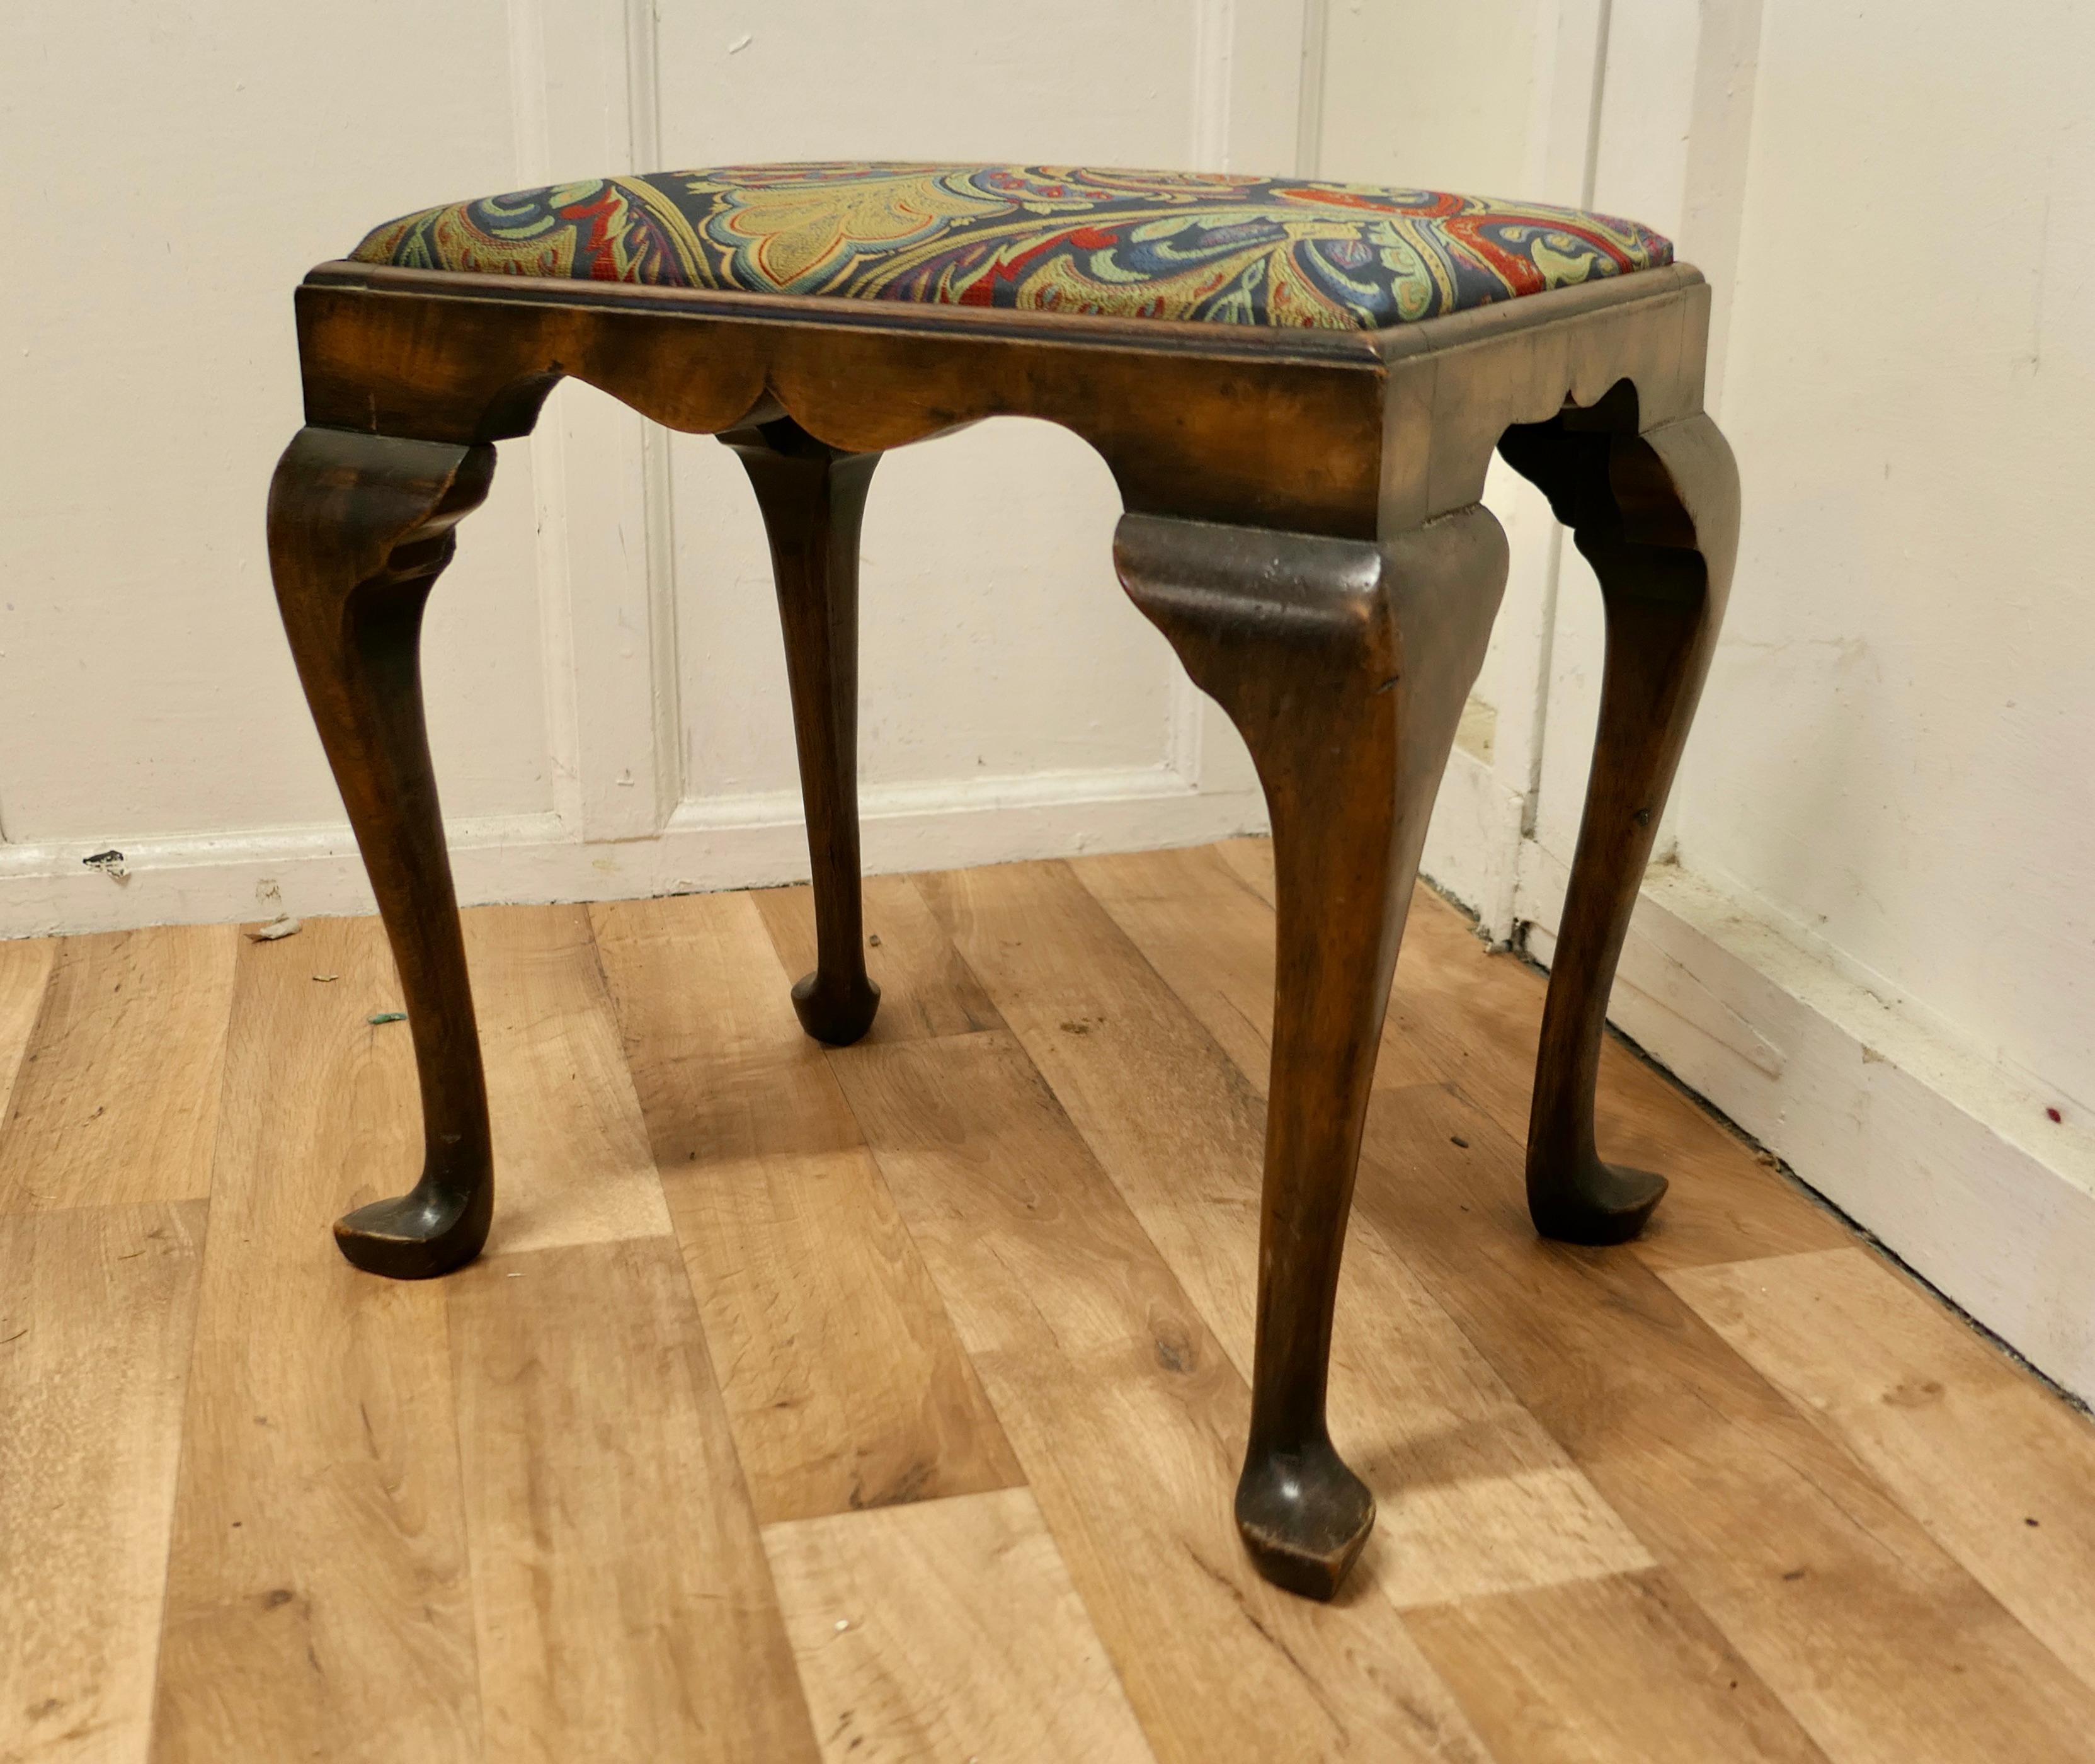 Elegant Victorian Art Nouveau walnut occasional stool.

This is a lovely quality stool is made in walnut and set on cabriole legs with attractive scalloped edges it is upholstered with an extra thick Heavyweight Jacquard Fabric, a superb Art